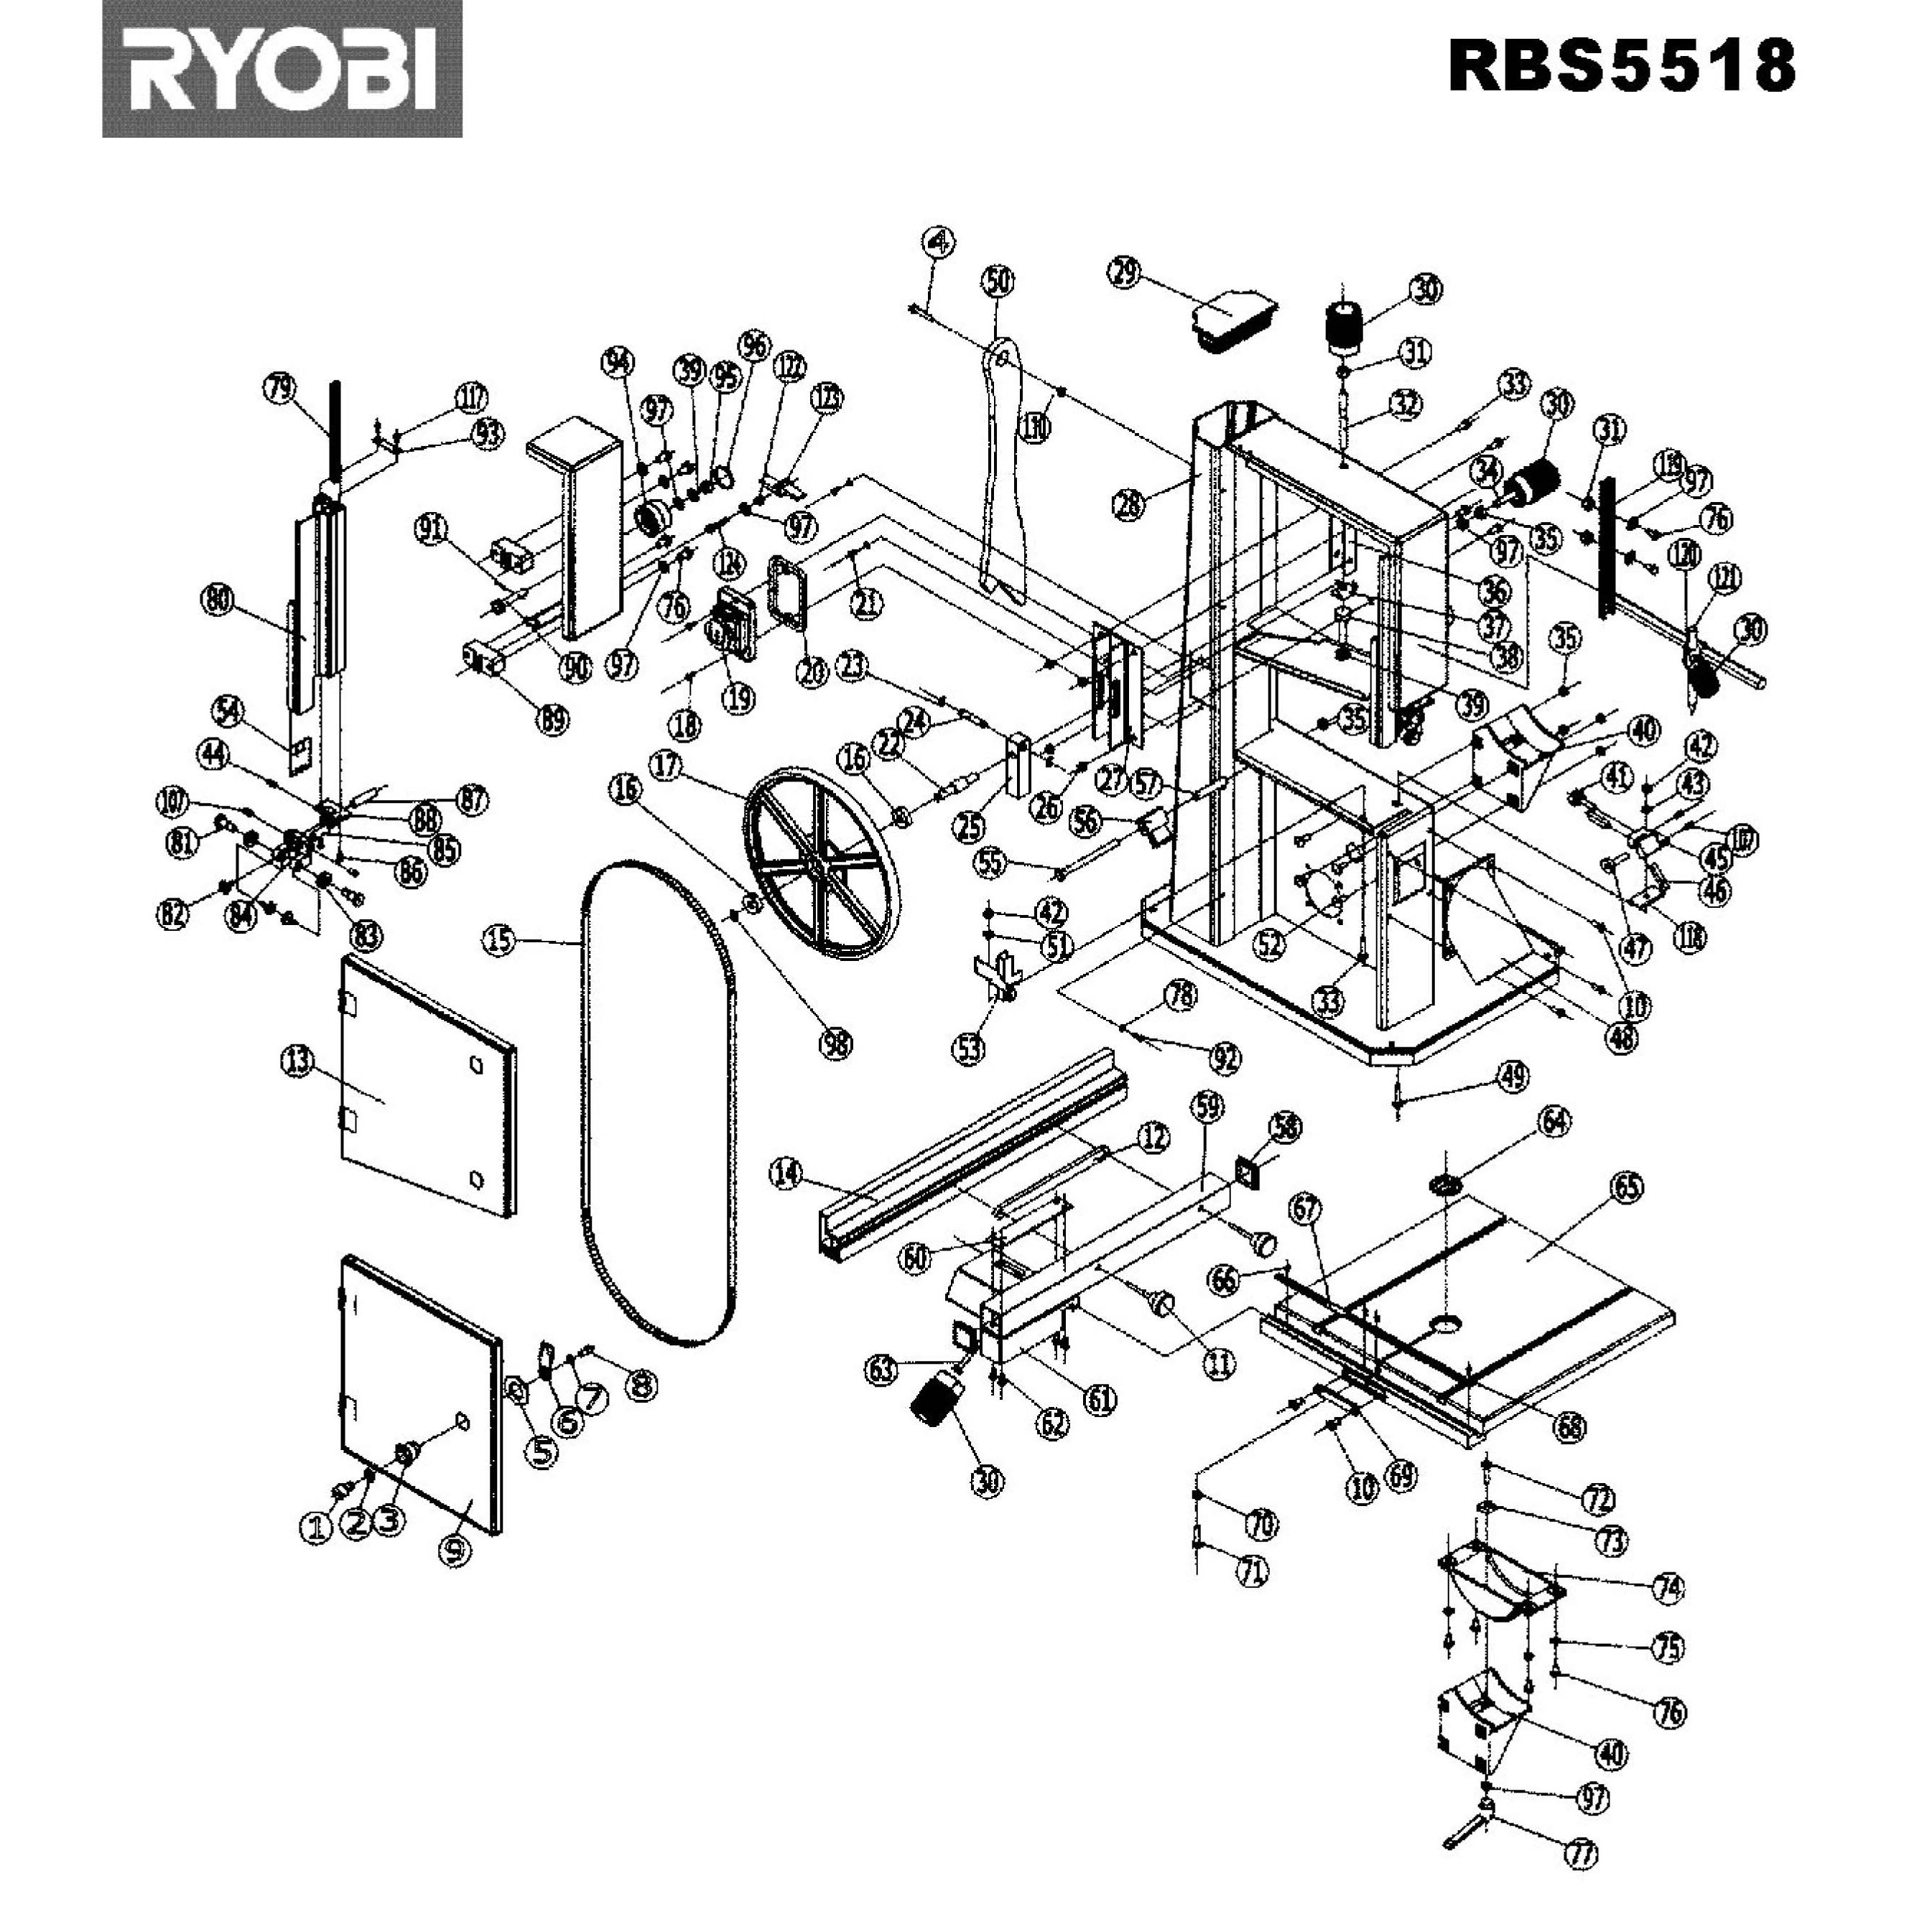 Buy A Ryobi part or Replacement part for Your and Your Machine Today